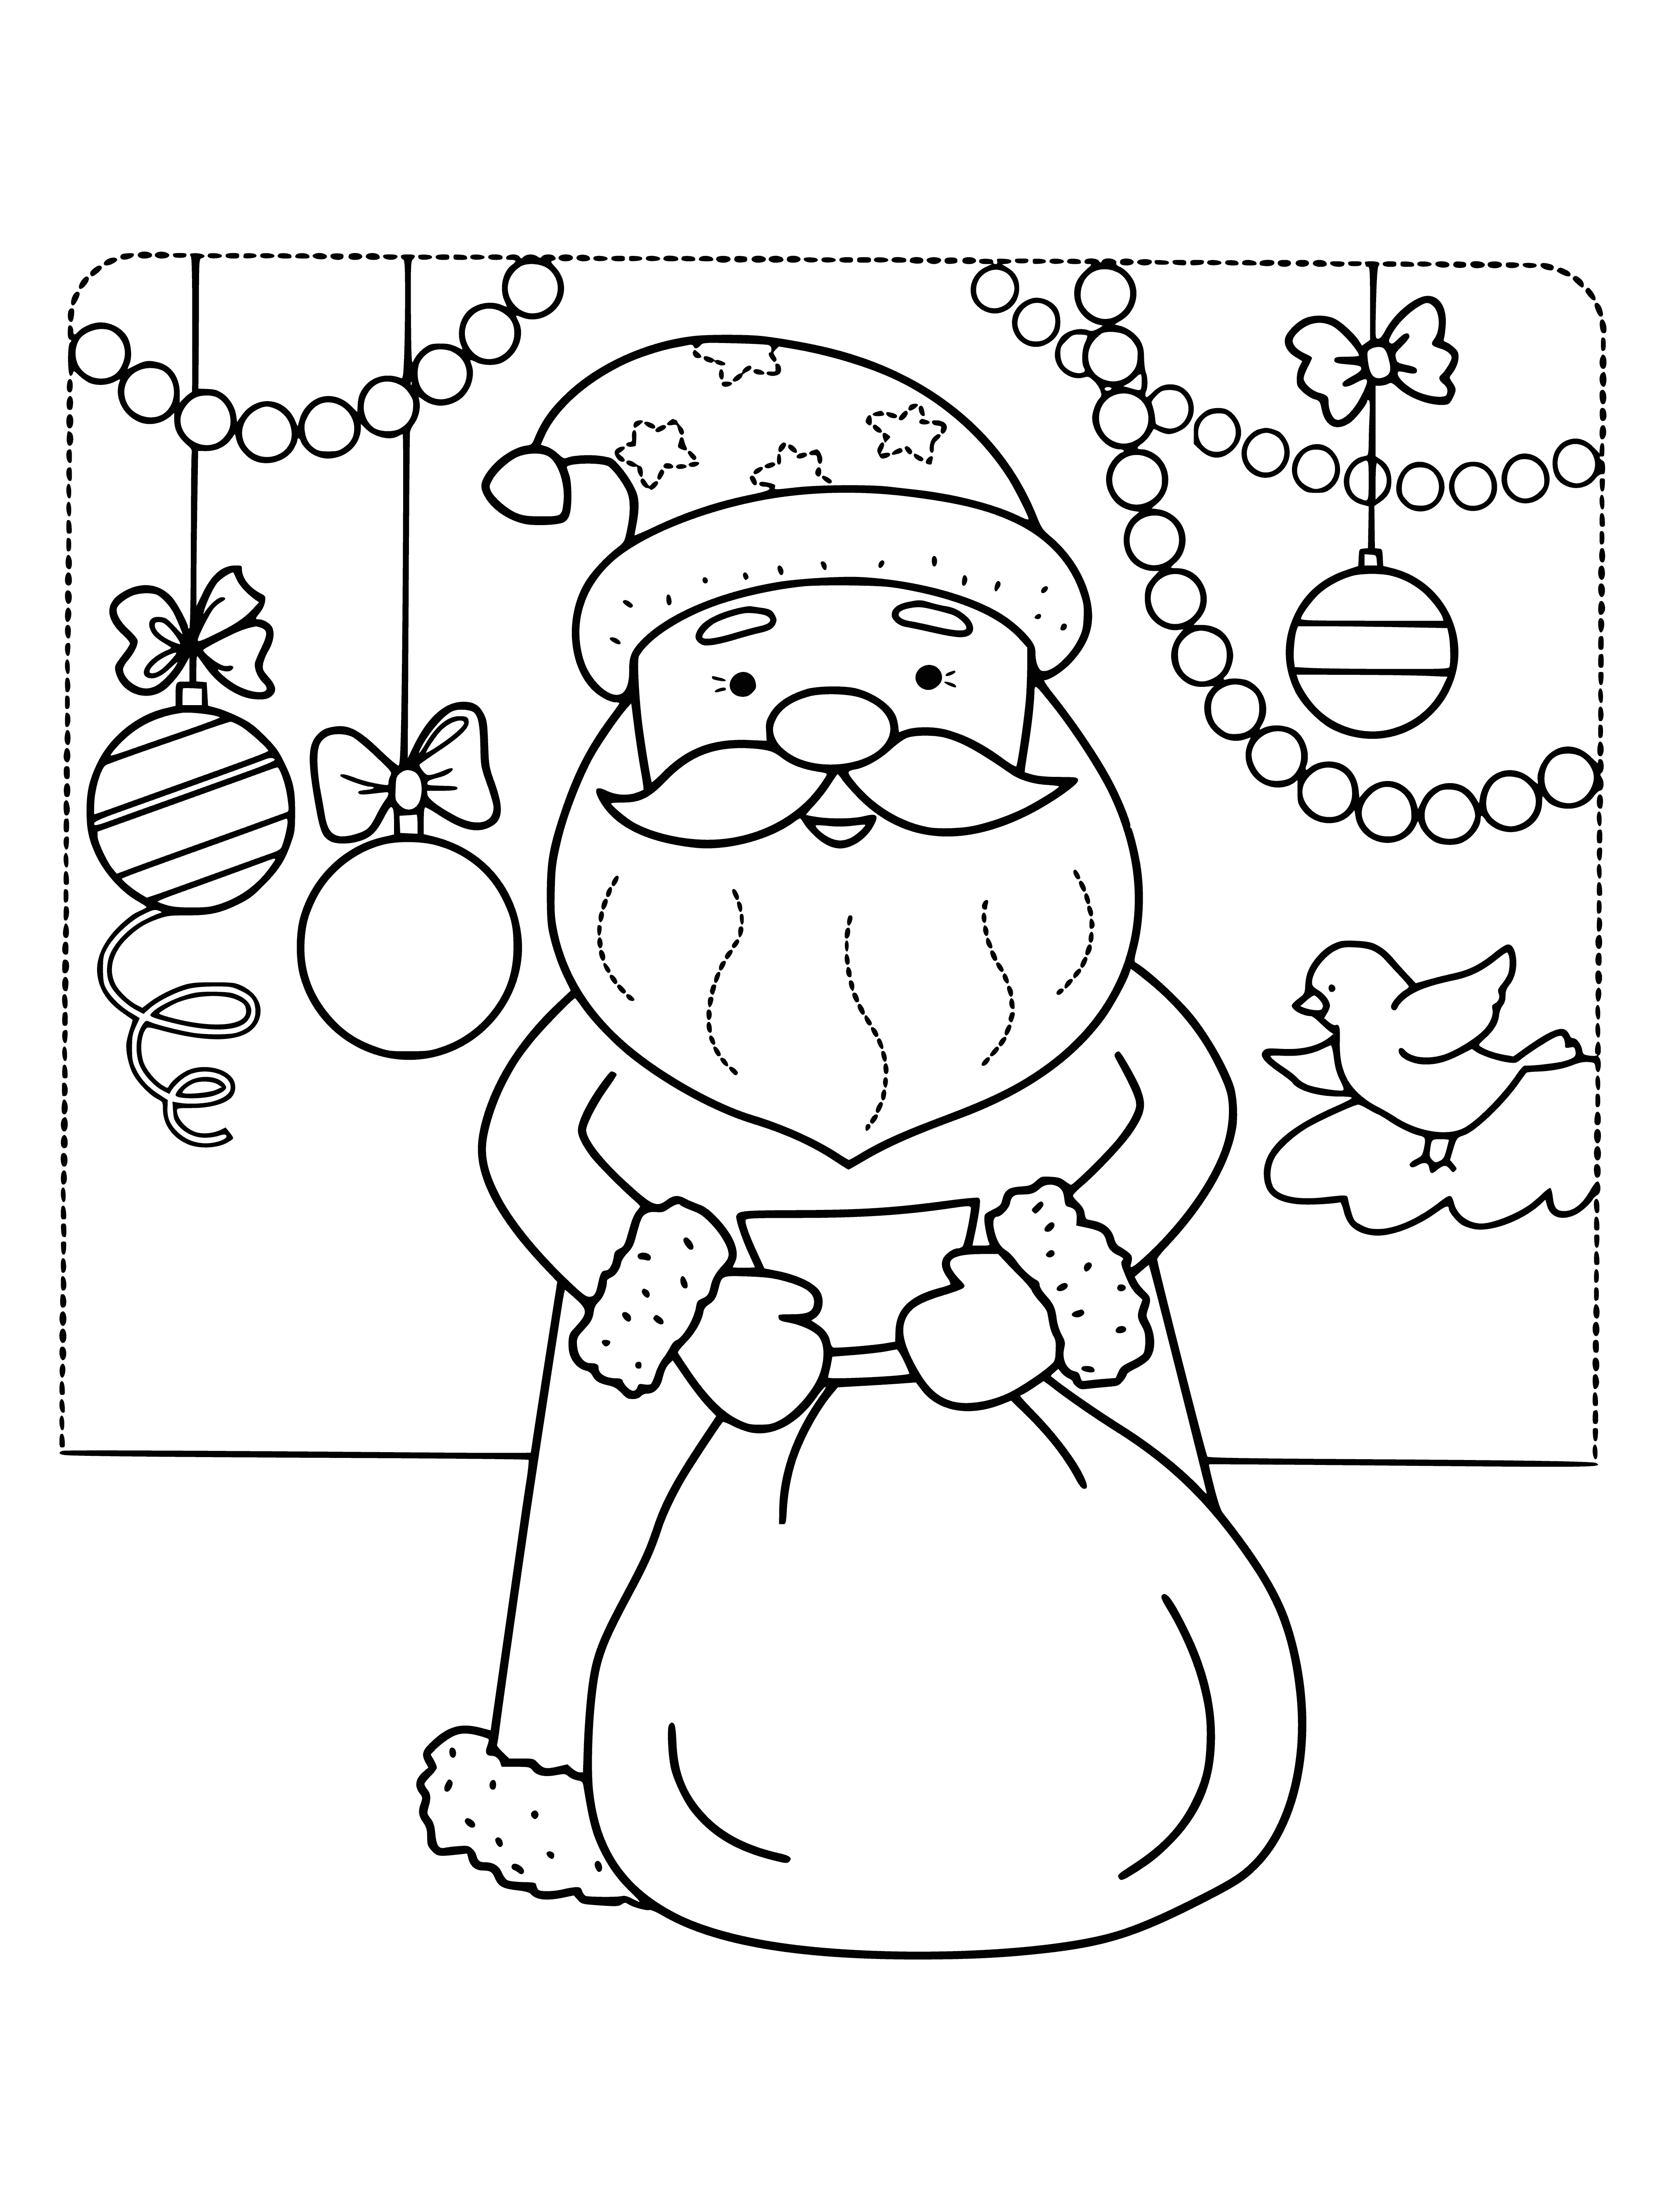 Santa Claus is wearing a red suit and red hat with white fur trim, giving presents from his big sack.